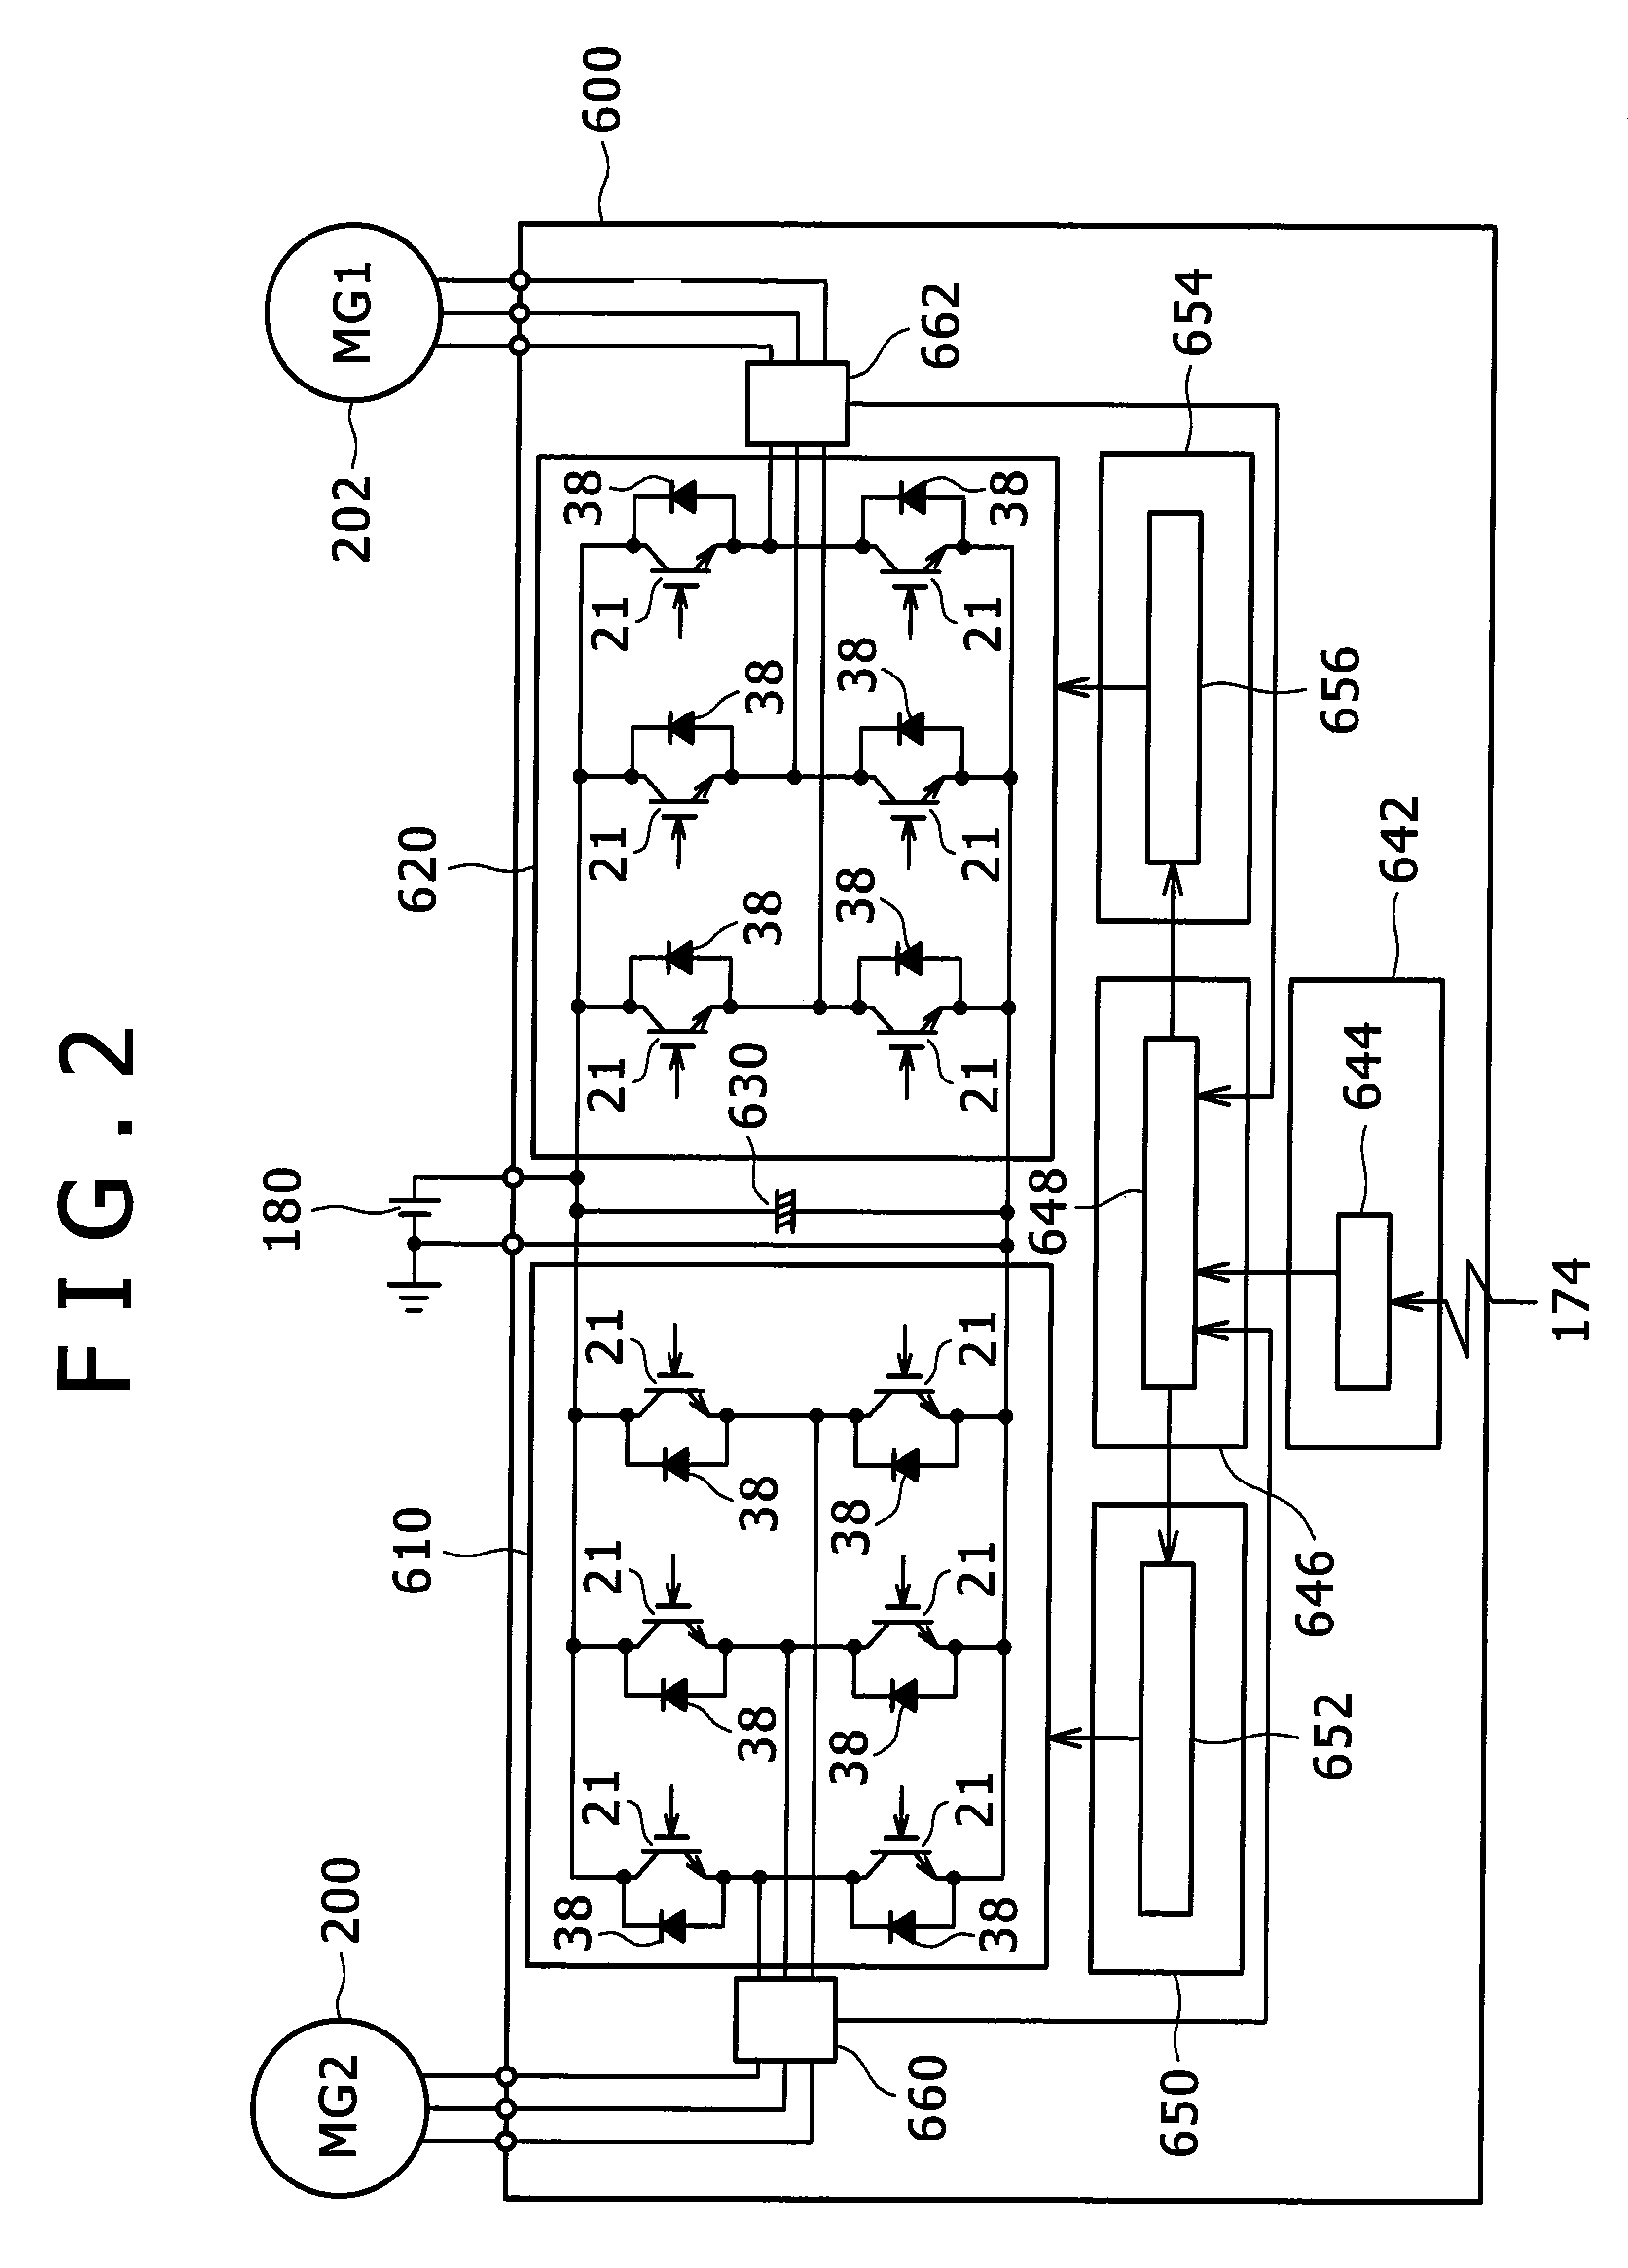 Rotary electric machine with air gaps configured to cancel torque pulsations